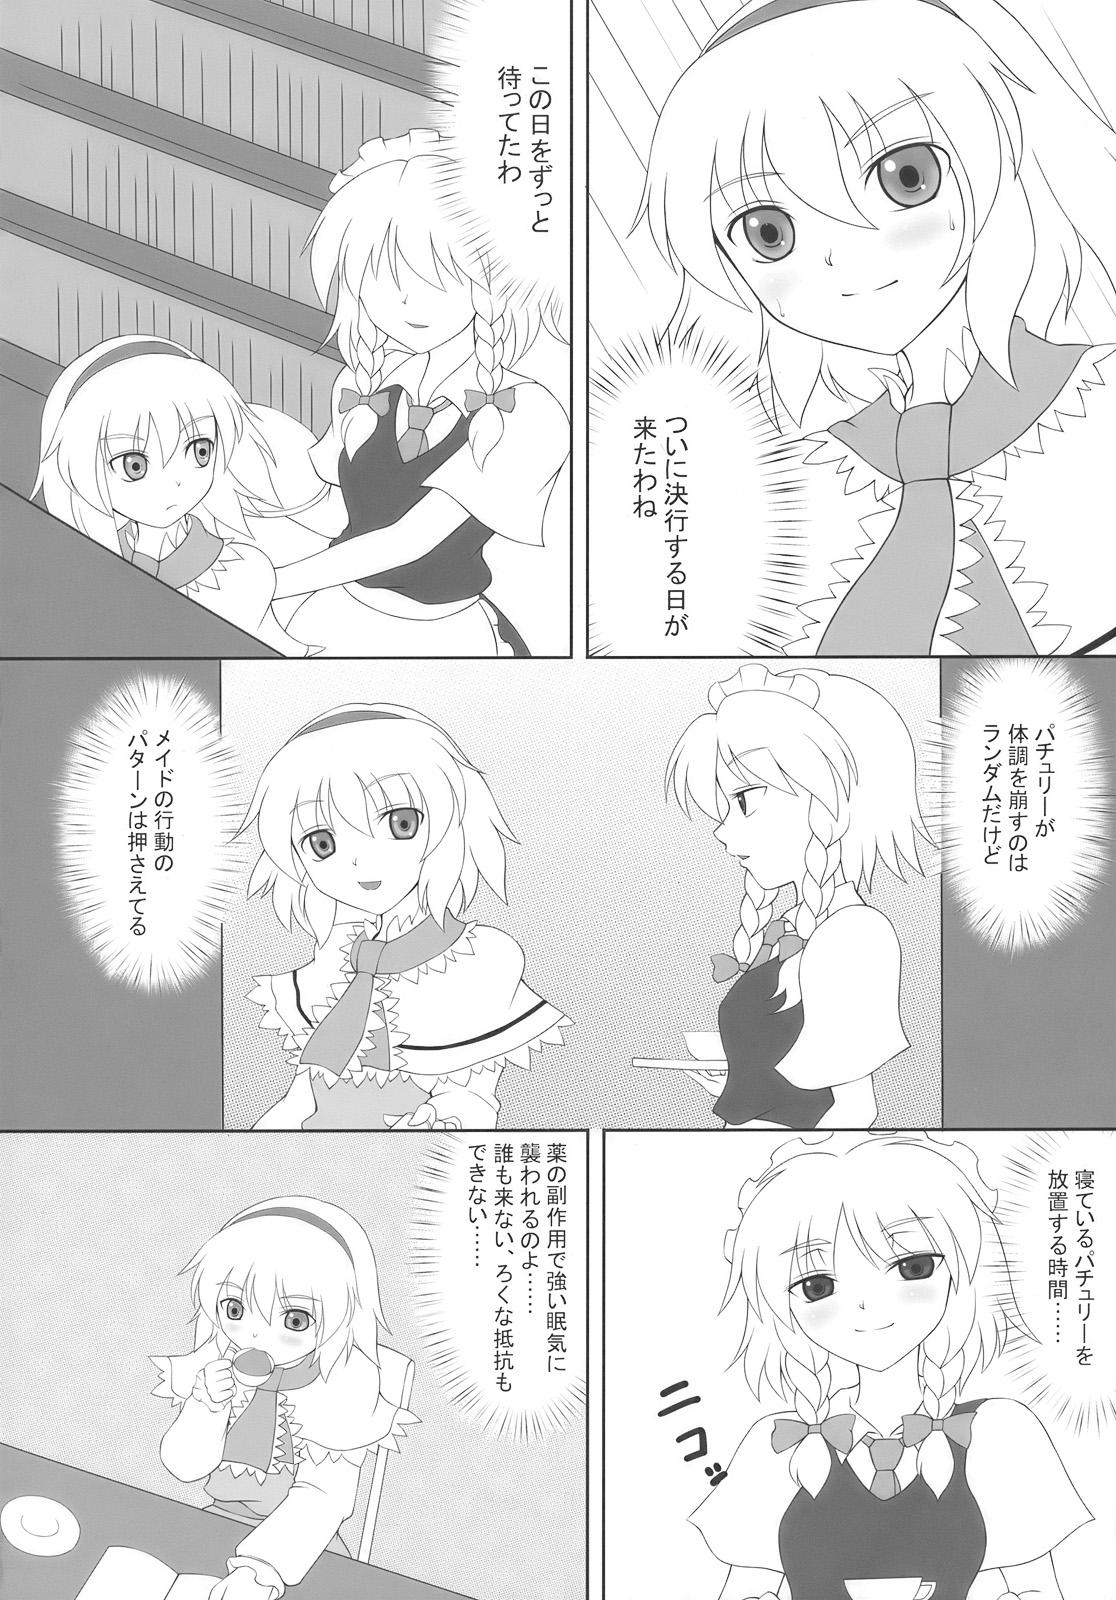 Humiliation After Tea Time - Touhou project Reality - Page 4